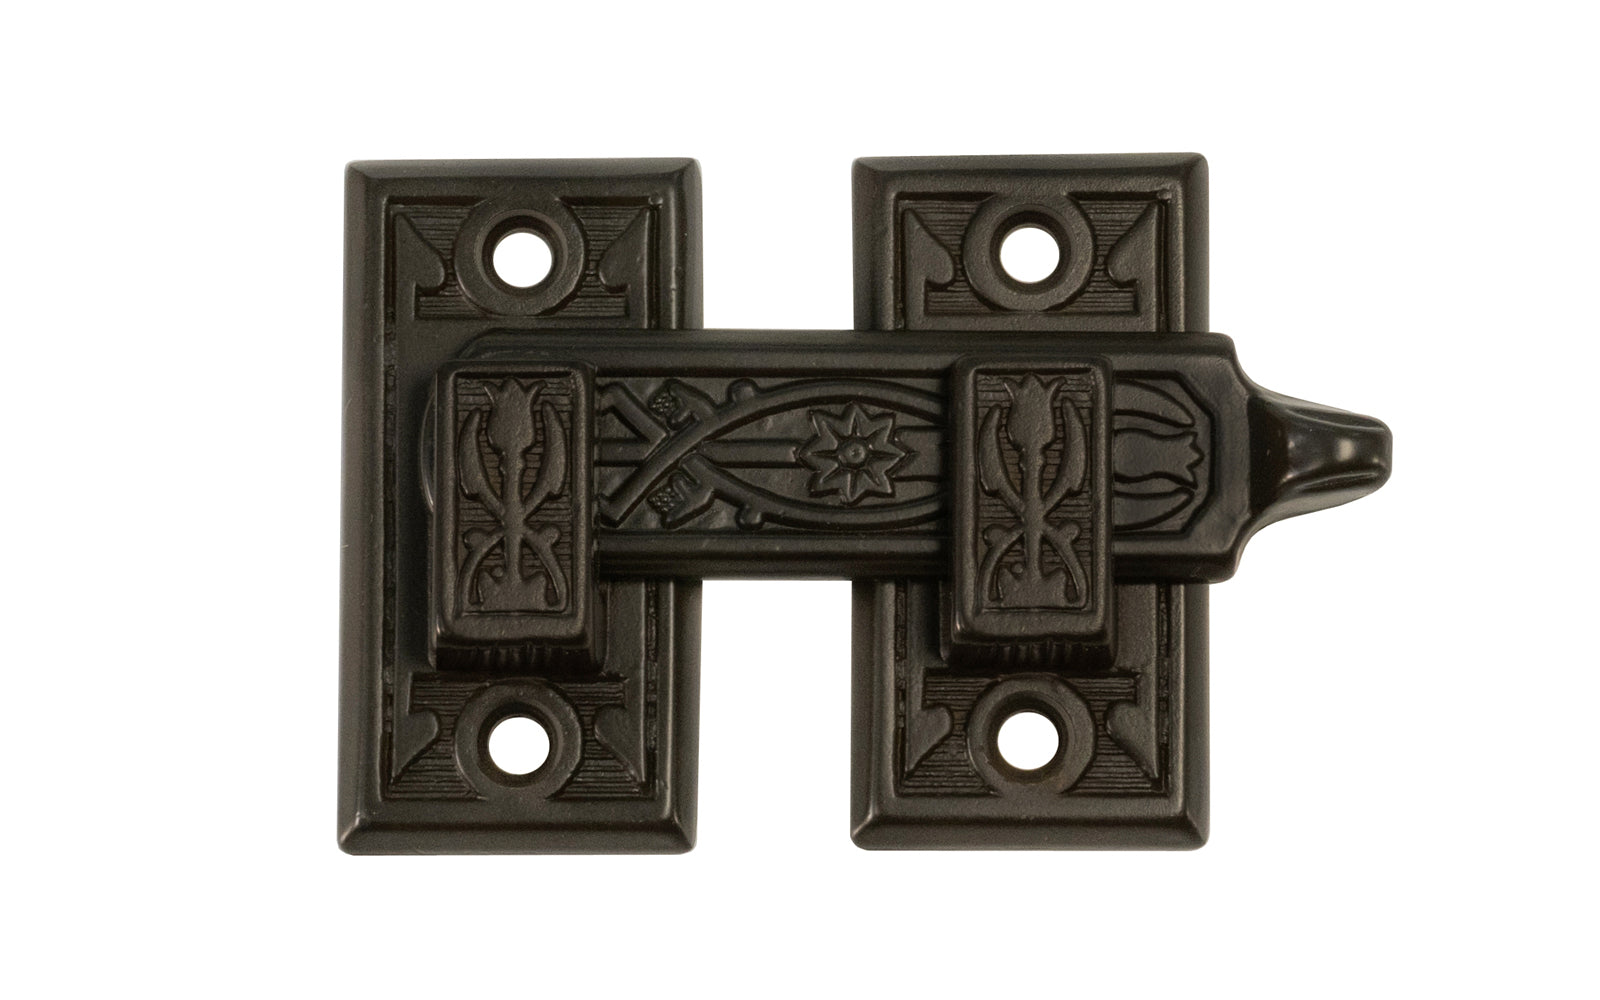 Vintage-style Hardware · Classic & traditional ornate style shutter bar made of solid brass material. Designed for interior window shutters, but it may be used on cabinet doors, bi-fold doors, pantry doors, windows, small doors. Victorian Style, Eastlake style hardware. Oil Rubbed Bronze Finish.